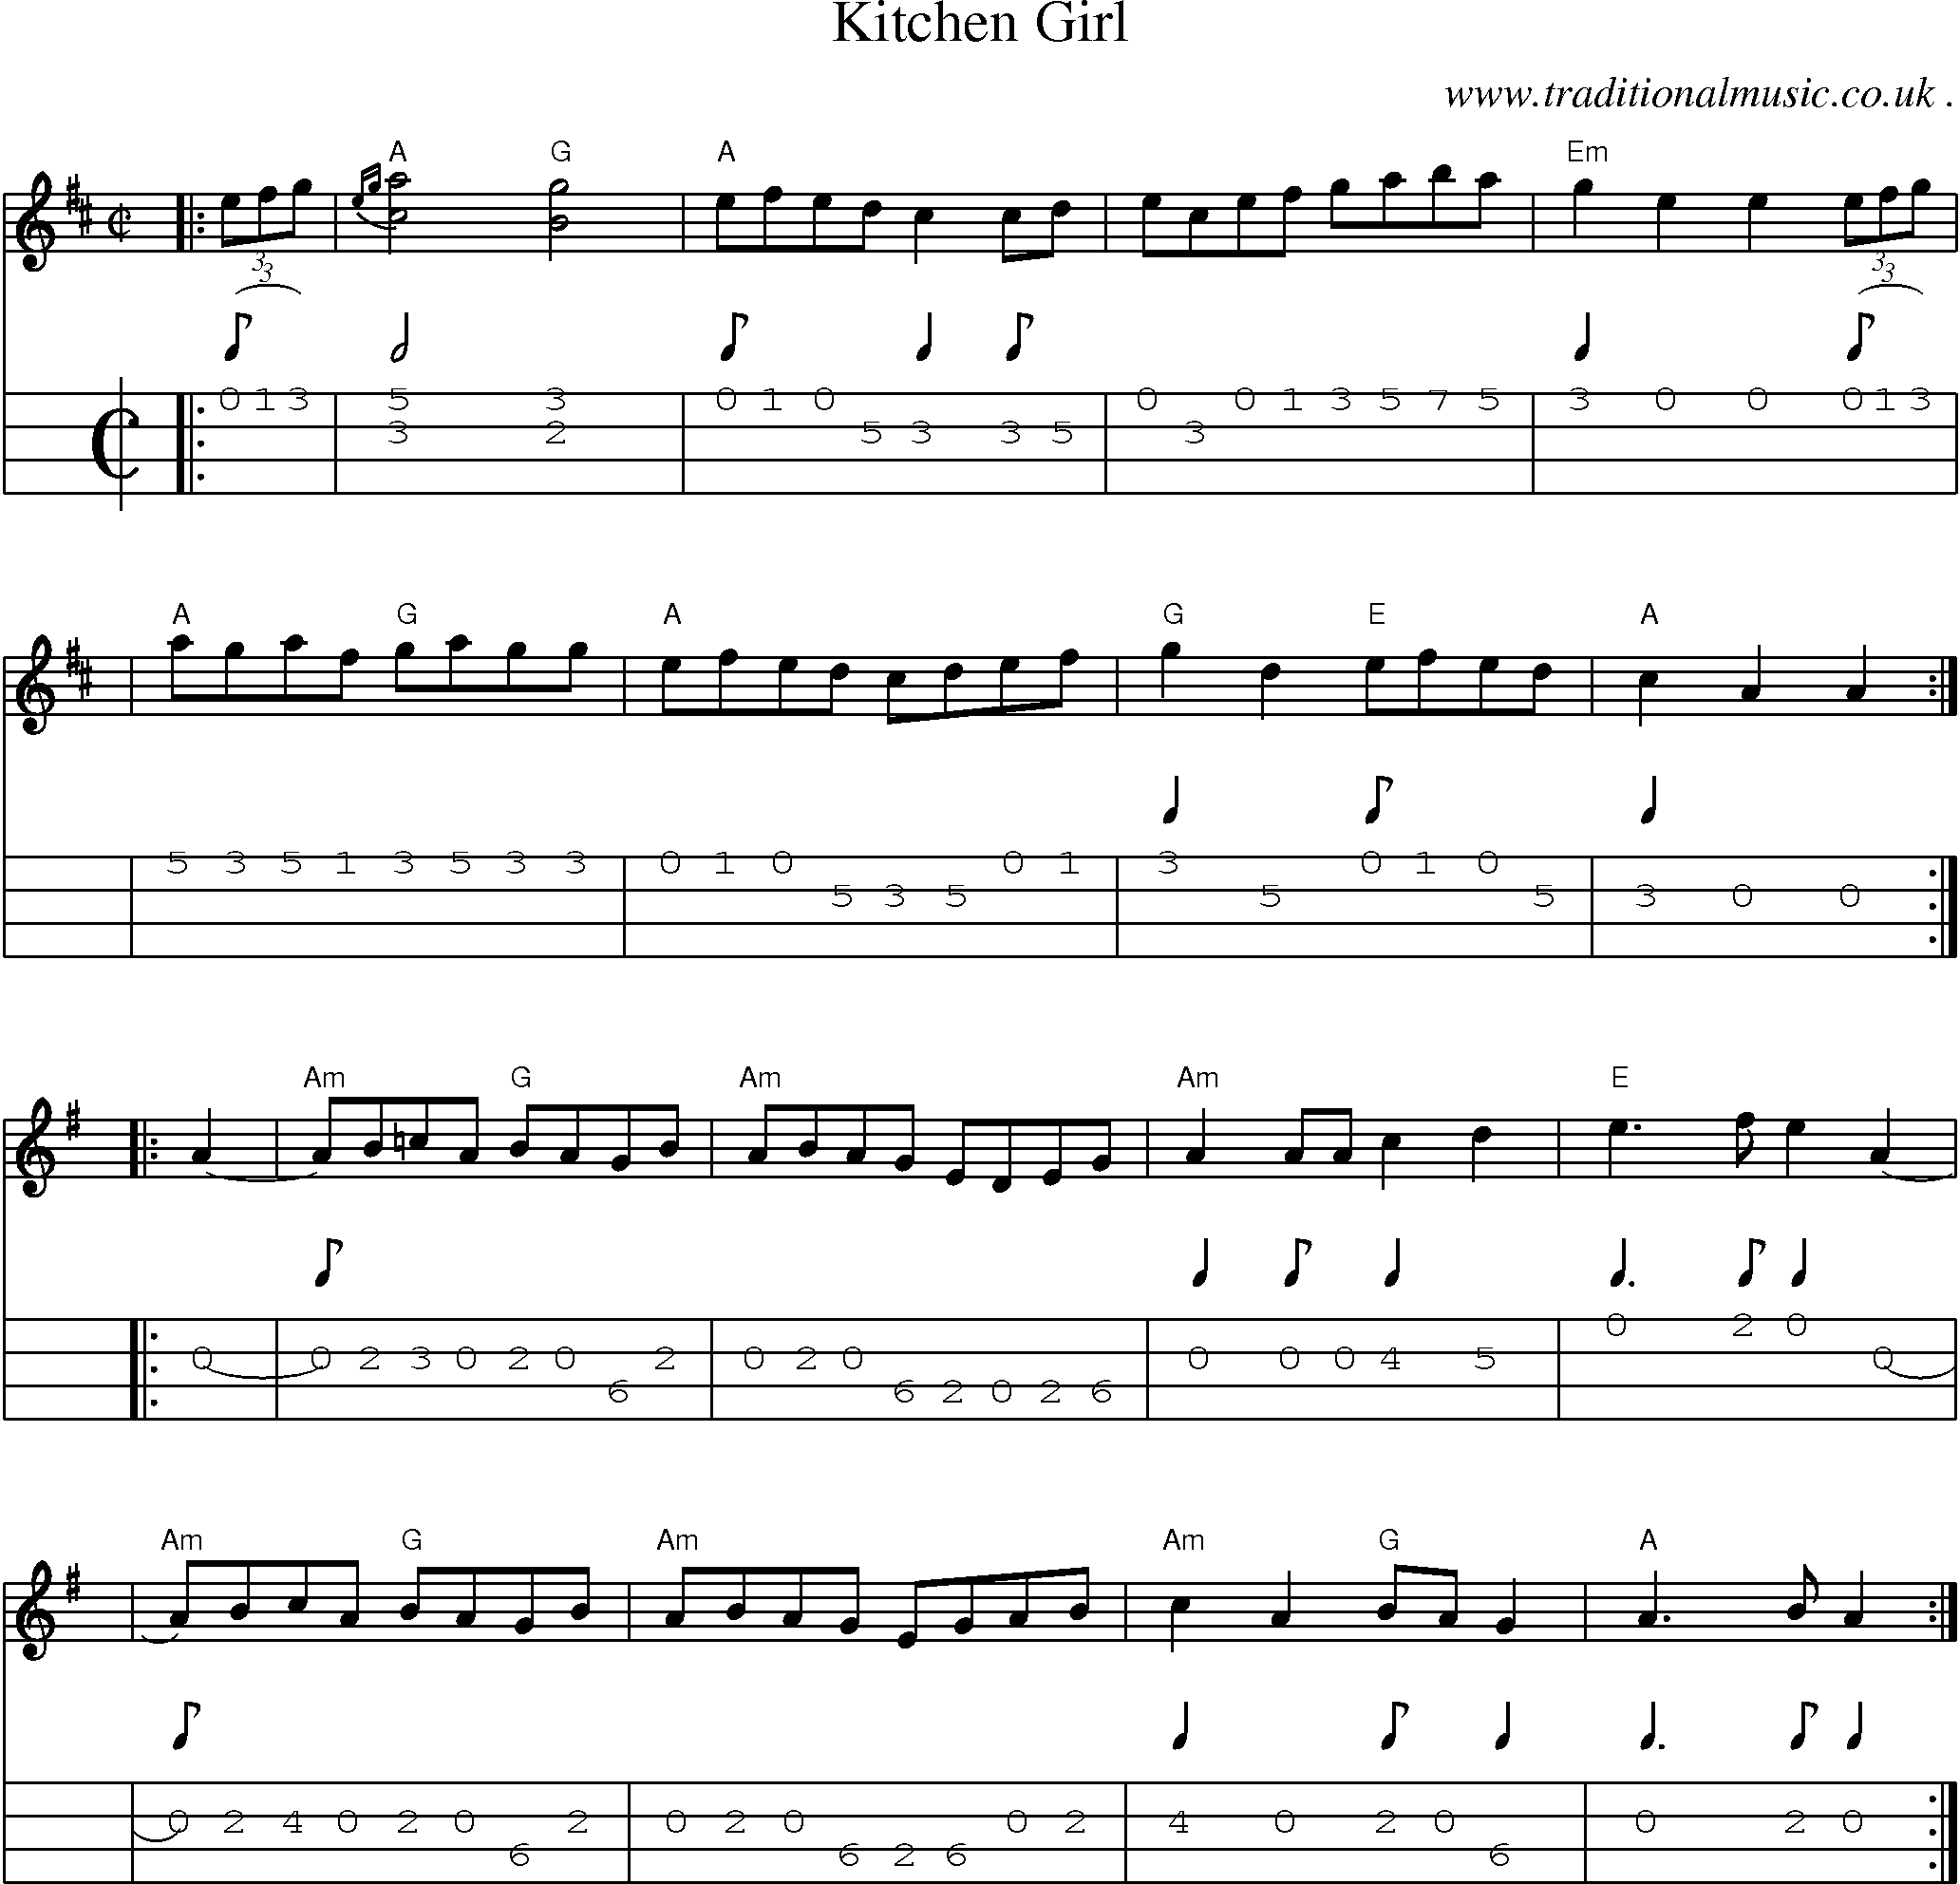 Music Score and Mandolin Tabs for Kitchen Girl